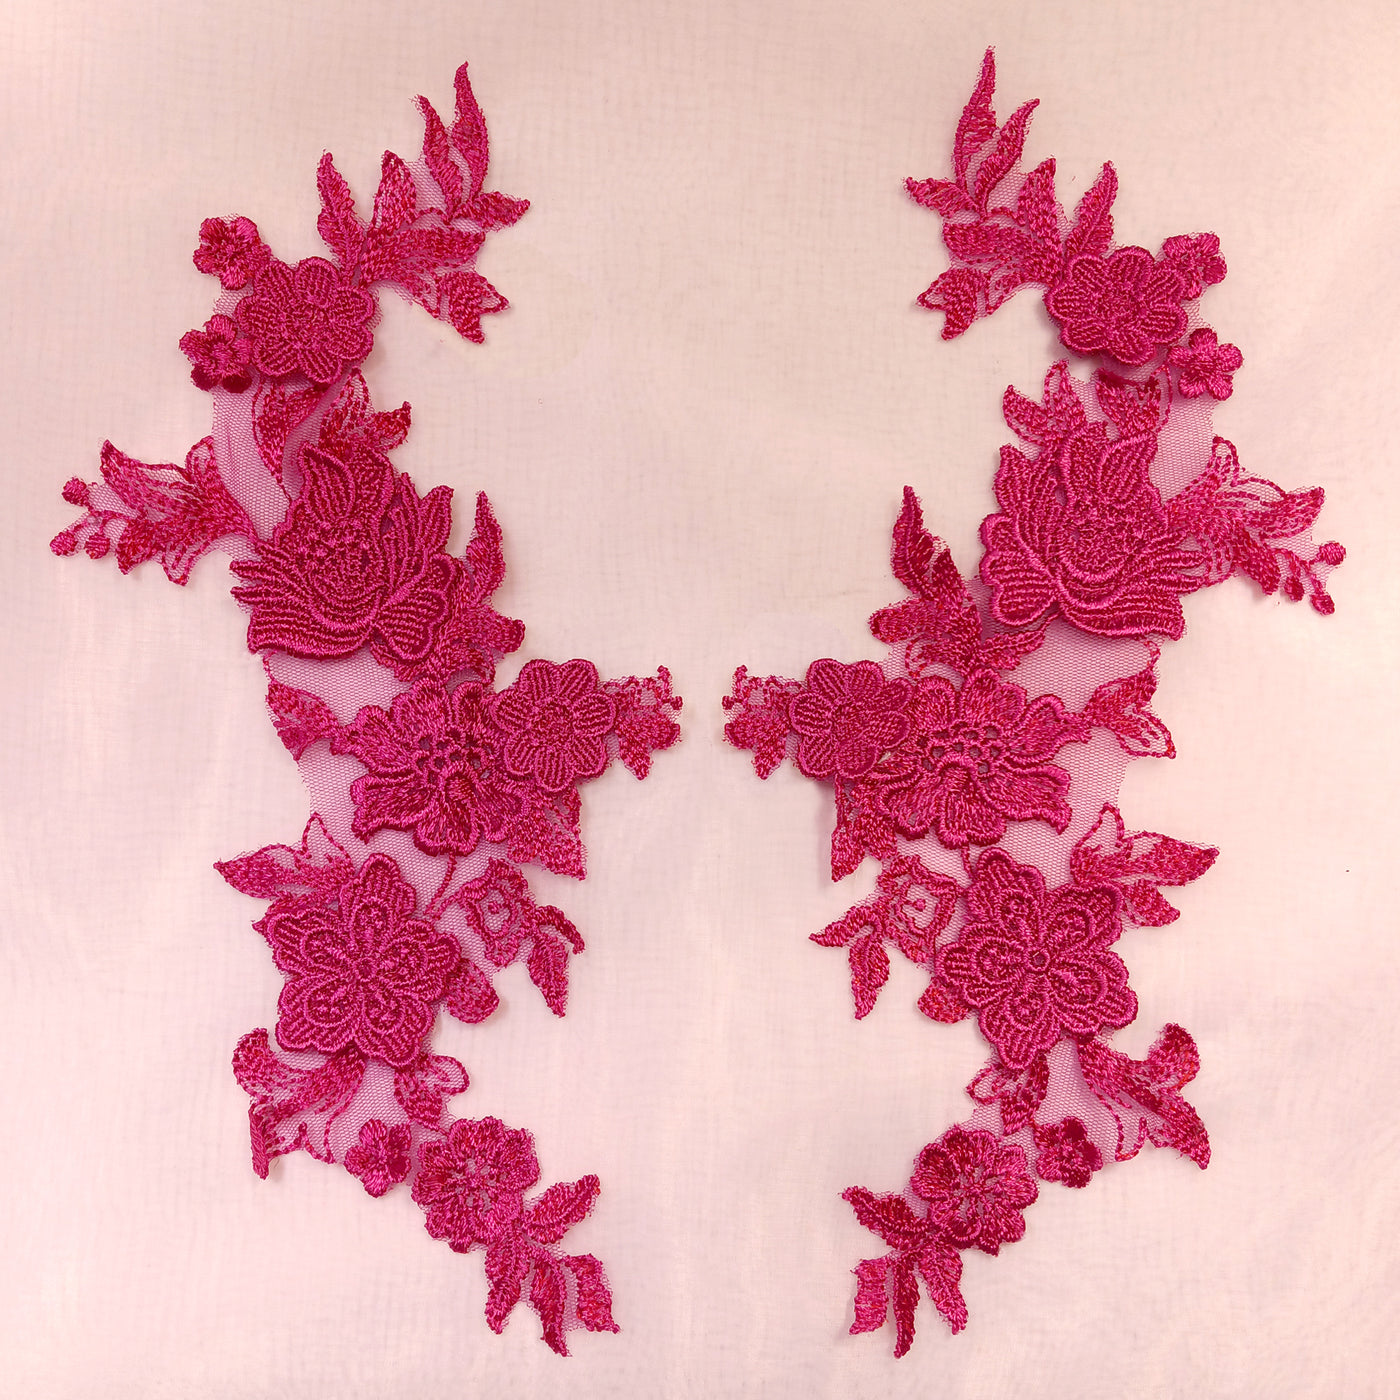 Embroidered Fuchsia Applique with 3D Flowers on 100% Polyester Net Mesh.